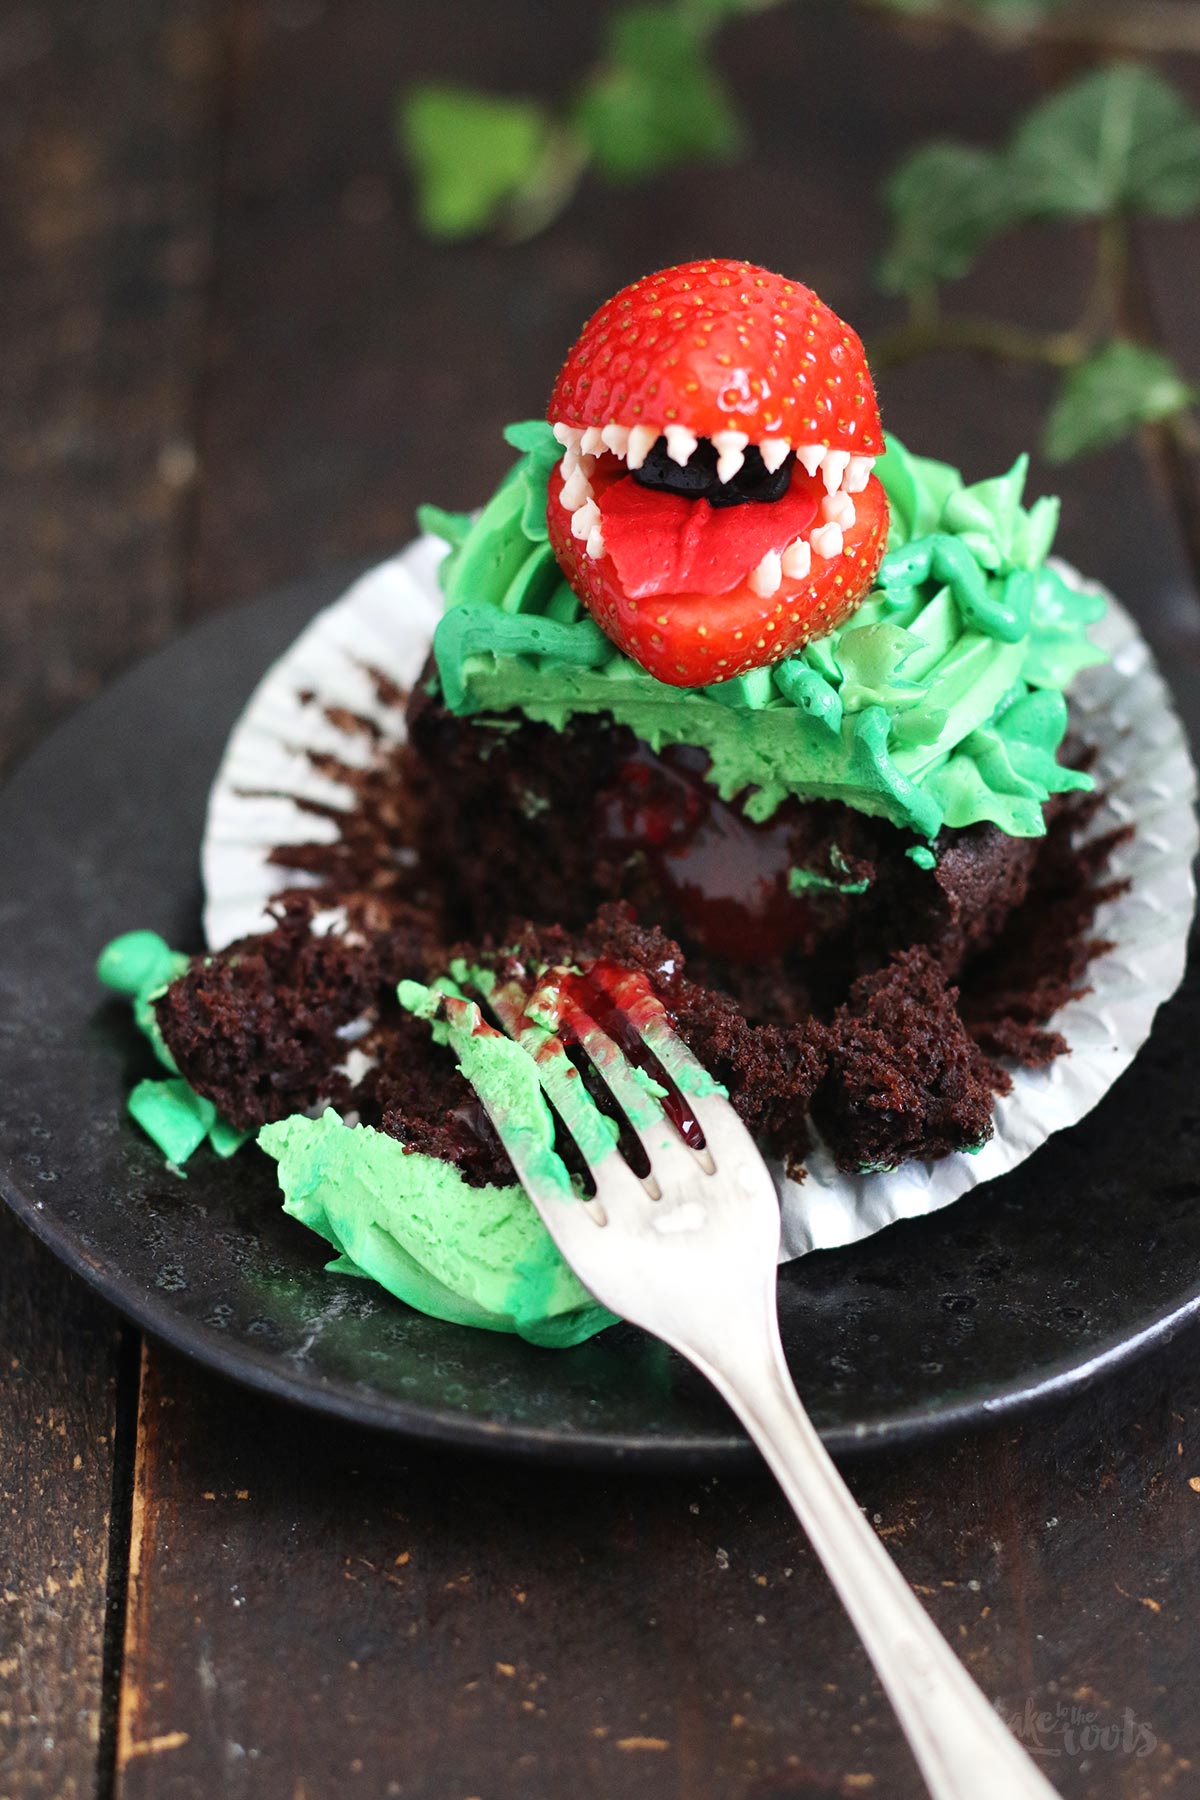 Audrey II Cupcakes from Little Shop of Horrors | Bake to the roots